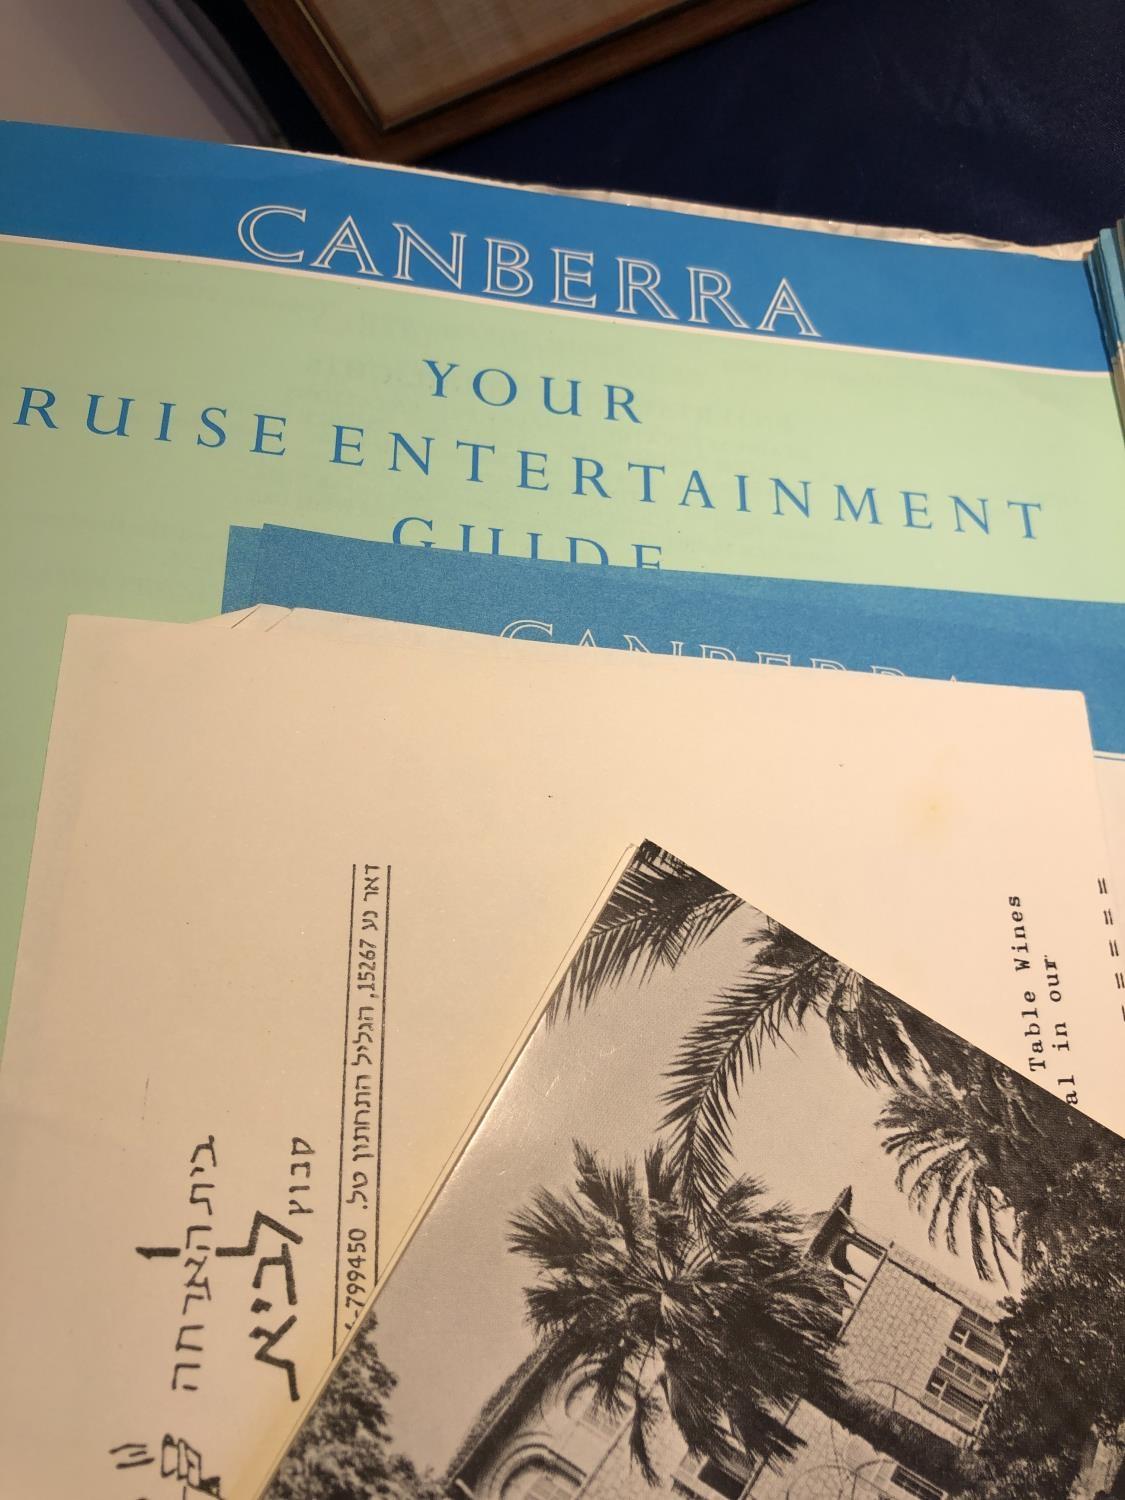 SS Canberra P&O Ocean Liner Interest - Ephemera including, Canberra Welcome aboard pack, cruise - Image 7 of 14